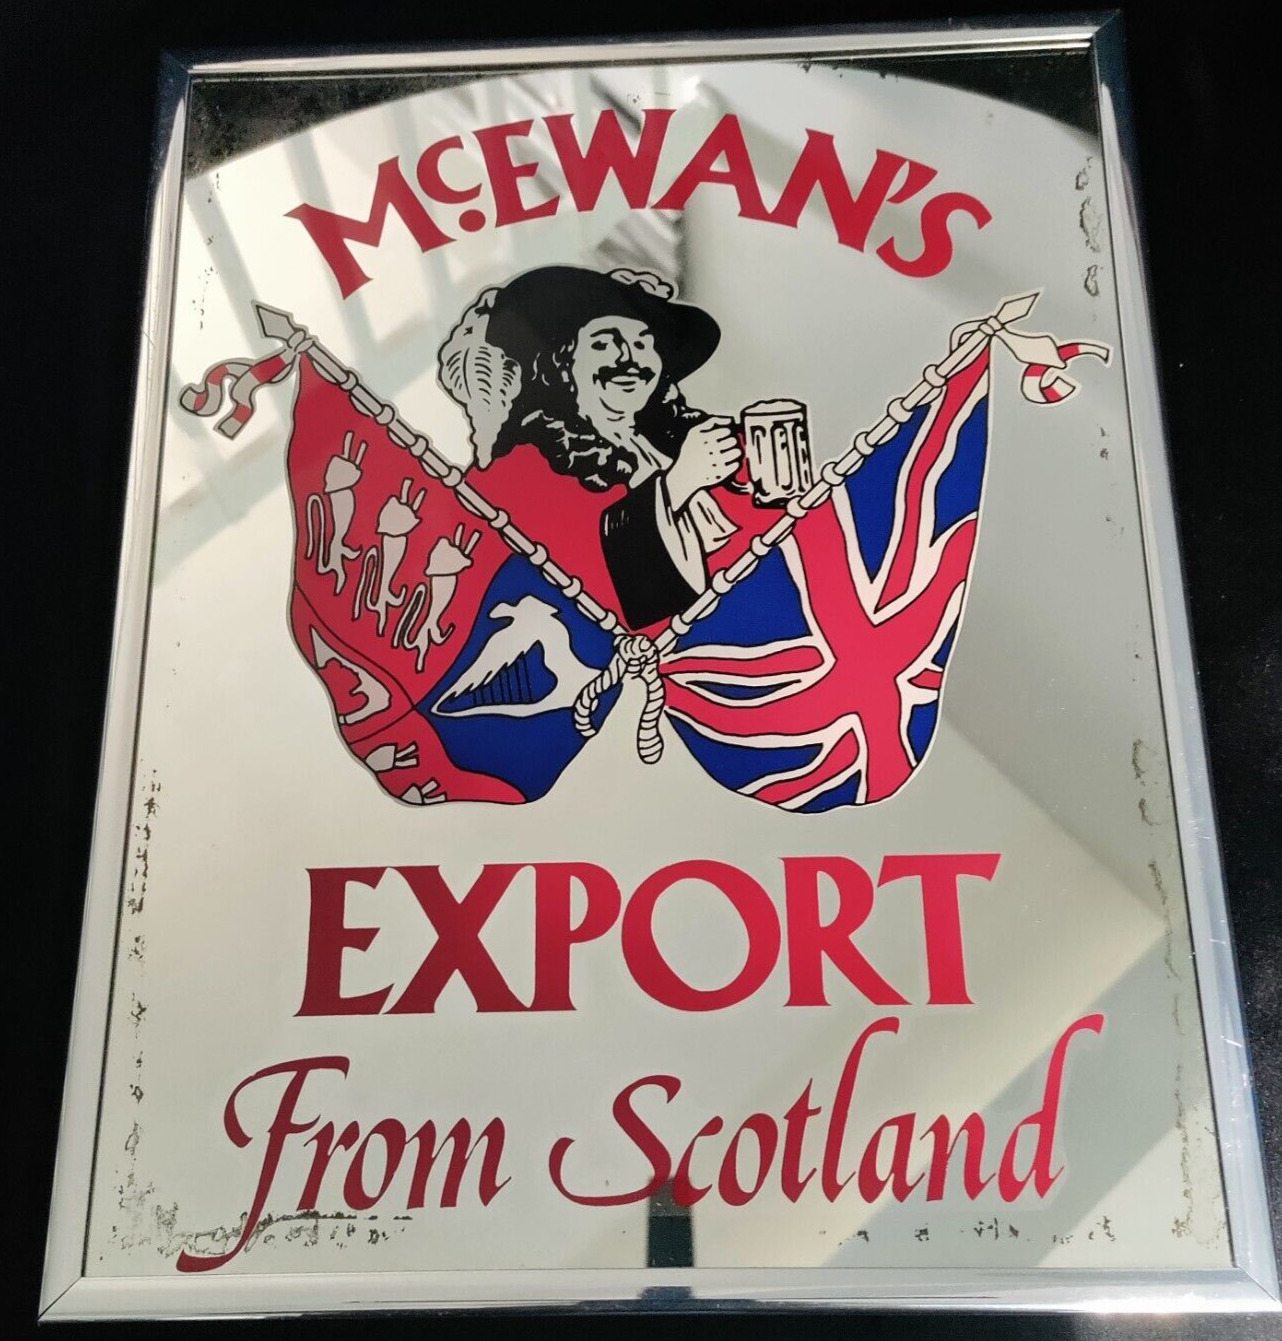 Vintage Mcewans From Scotland Mirrored Bar Sign 14x11  - See Descriprion